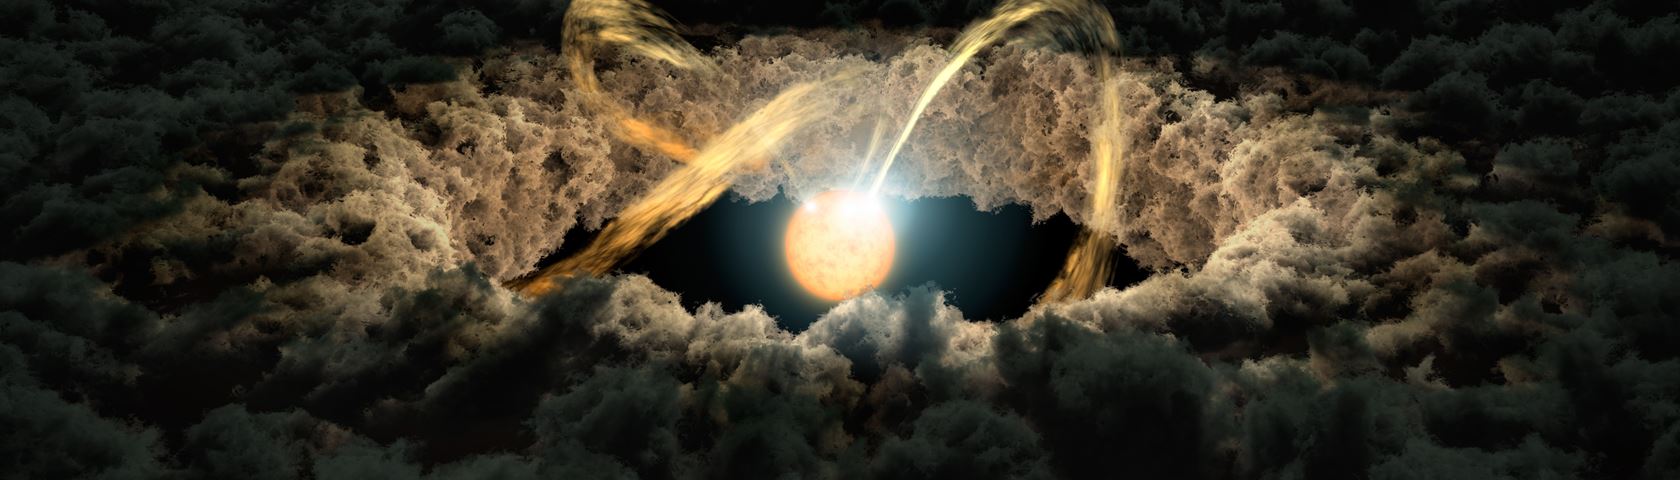 Star Surrounded by a Protoplanetary Disk